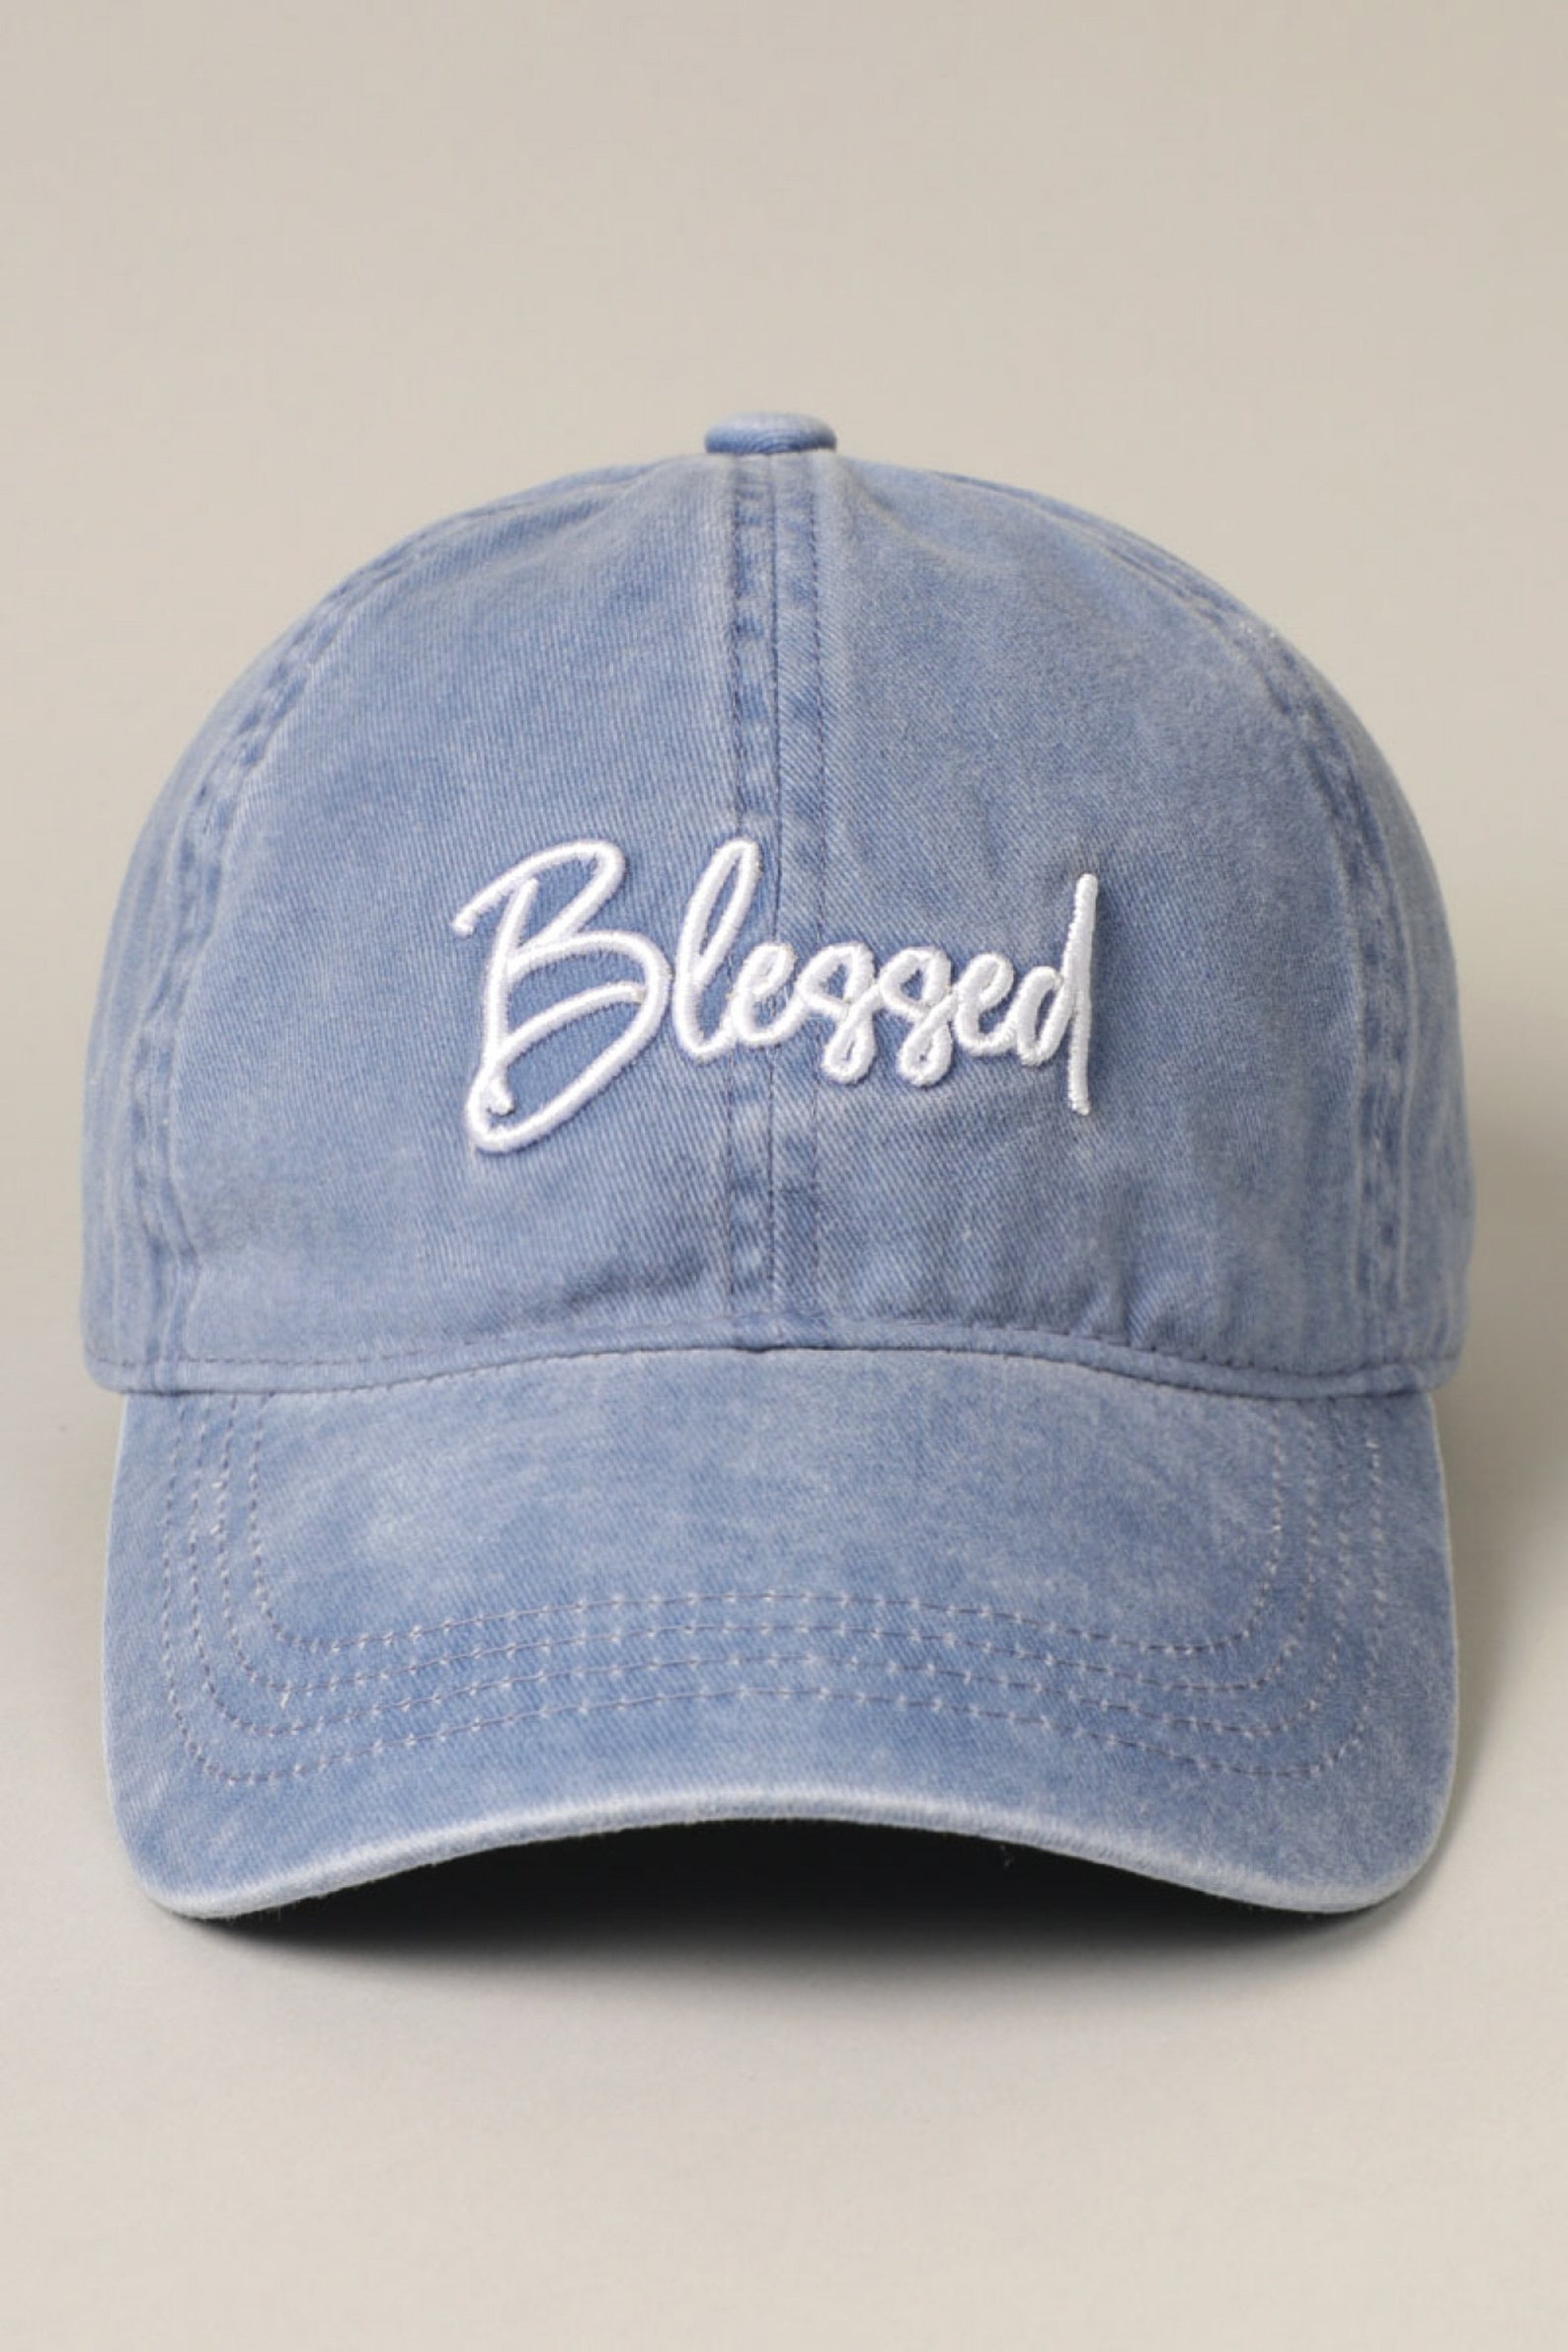 Blessed Hat Personalized Baseball Cap Embroidery Cap | Etsy